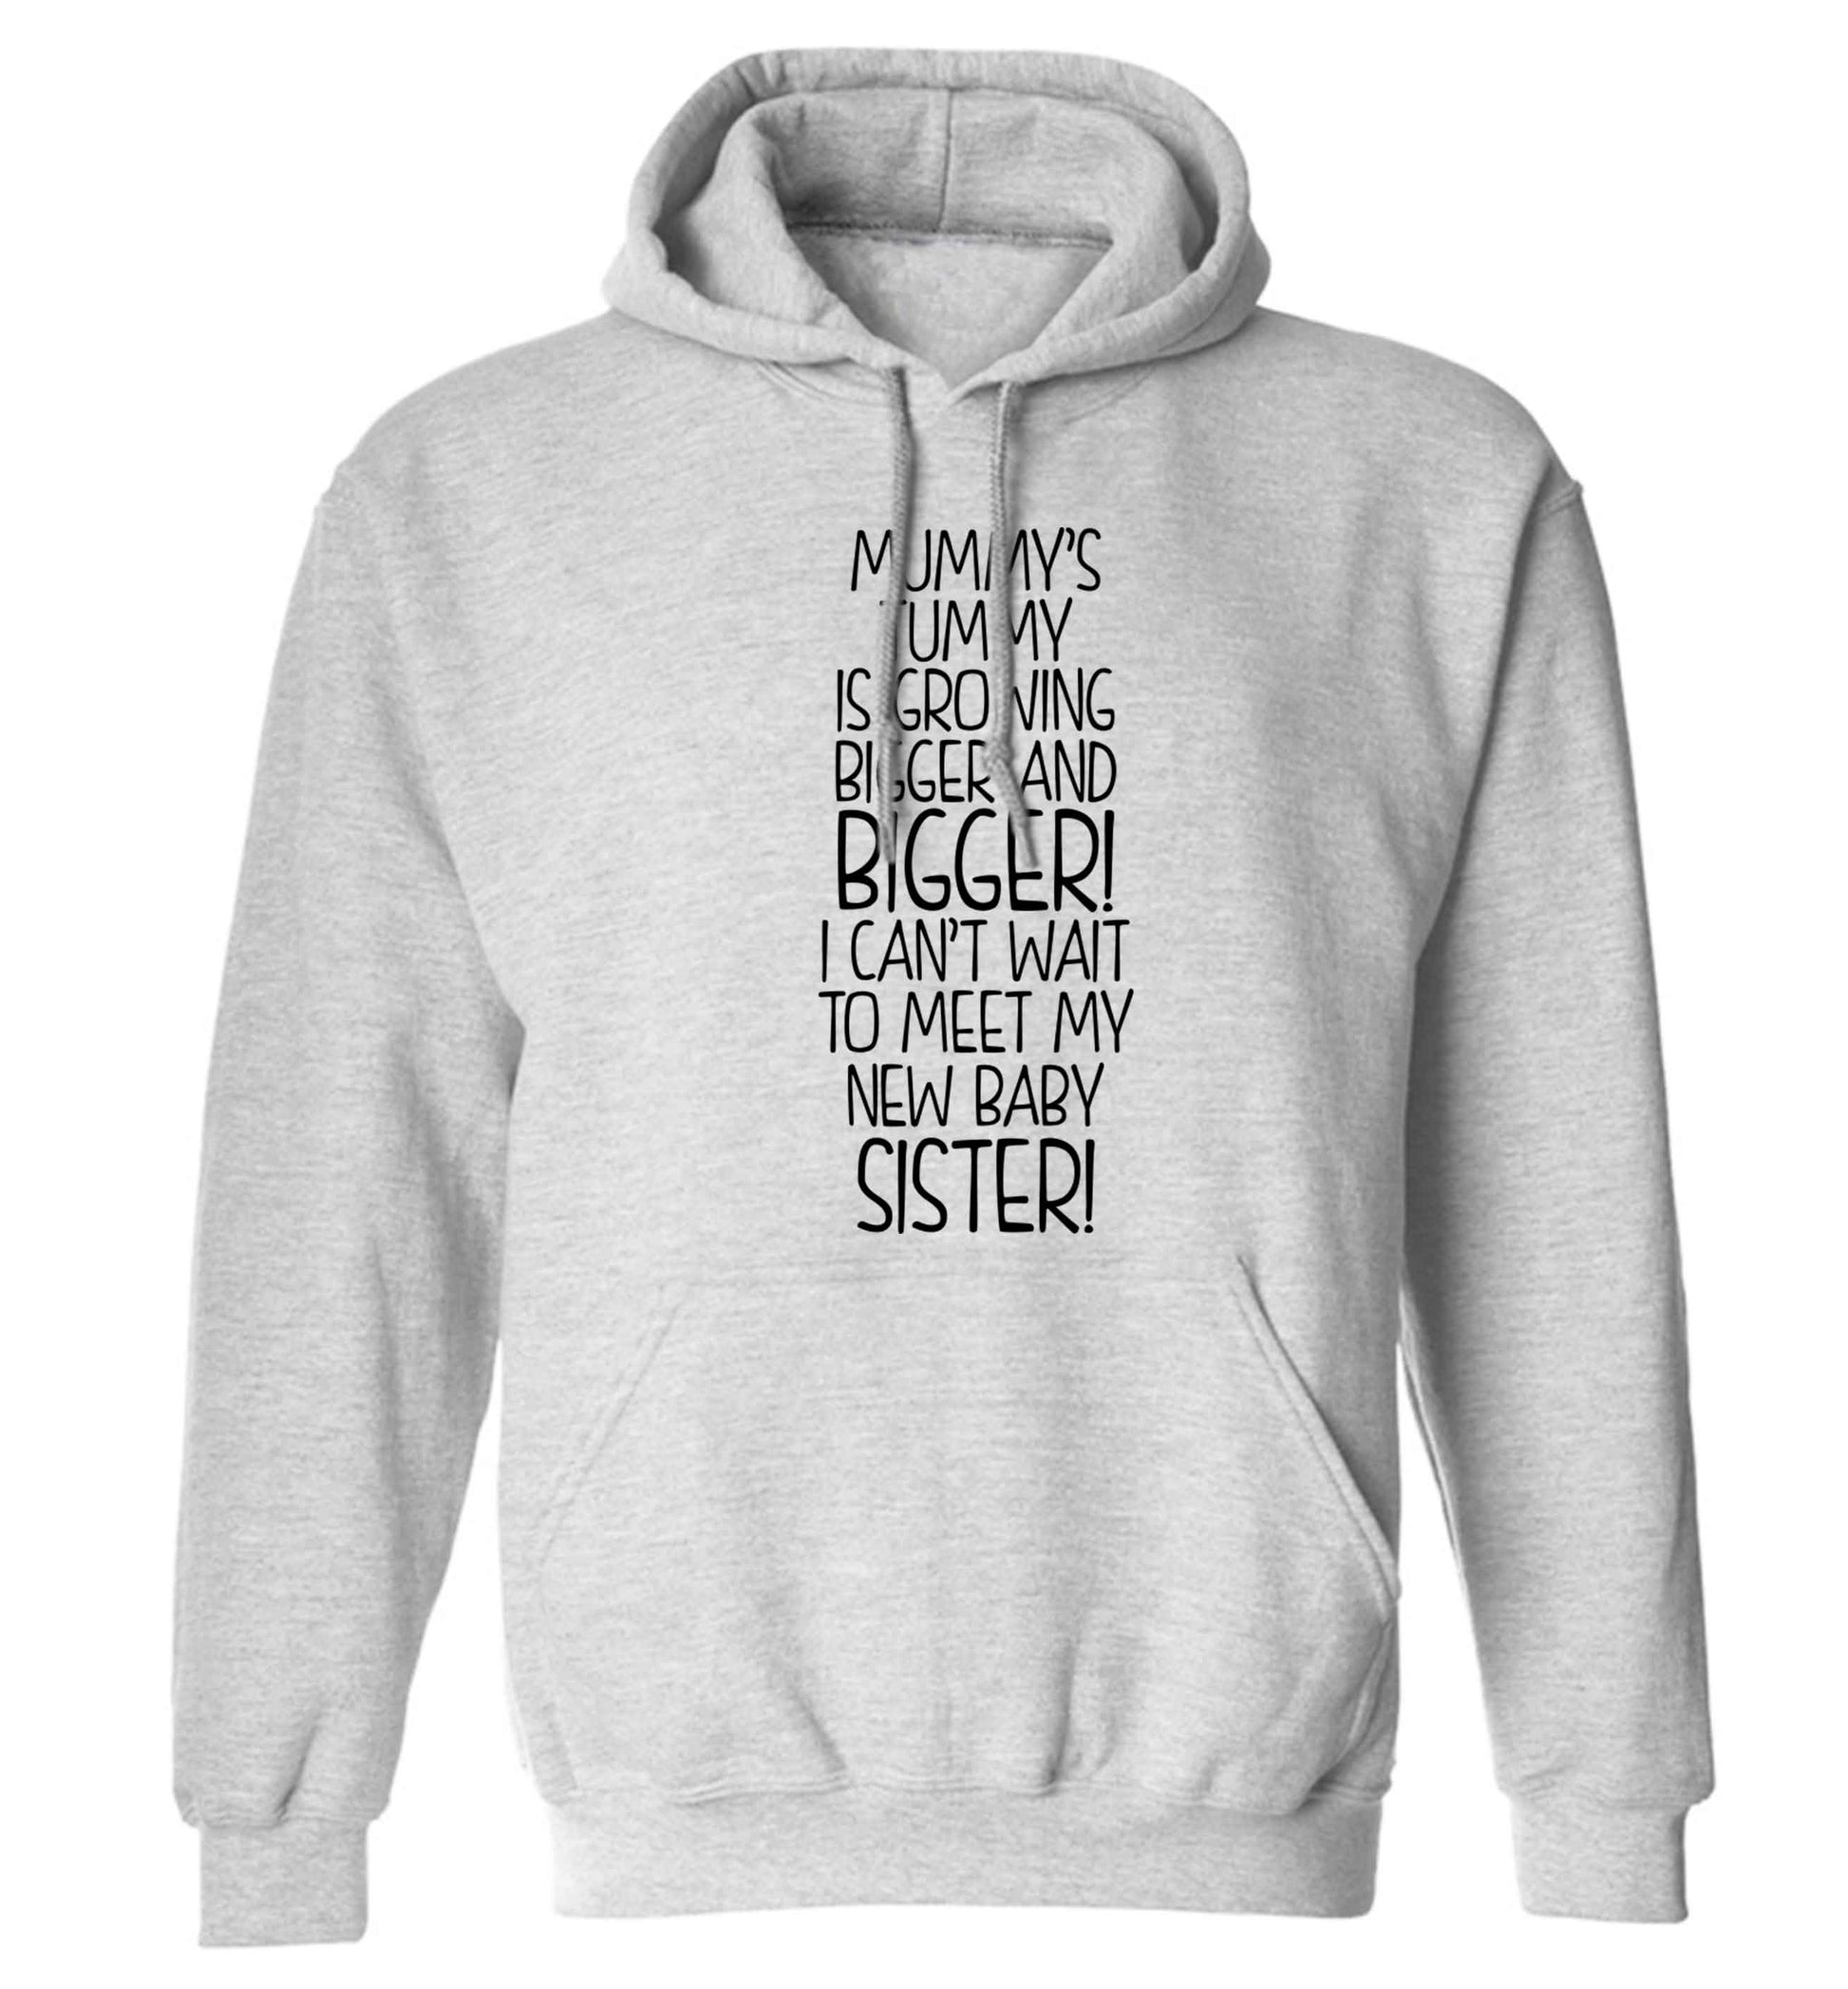 Mummy's tummy is growing bigger and bigger I can't wait to meet my new baby sister! adults unisex grey hoodie 2XL